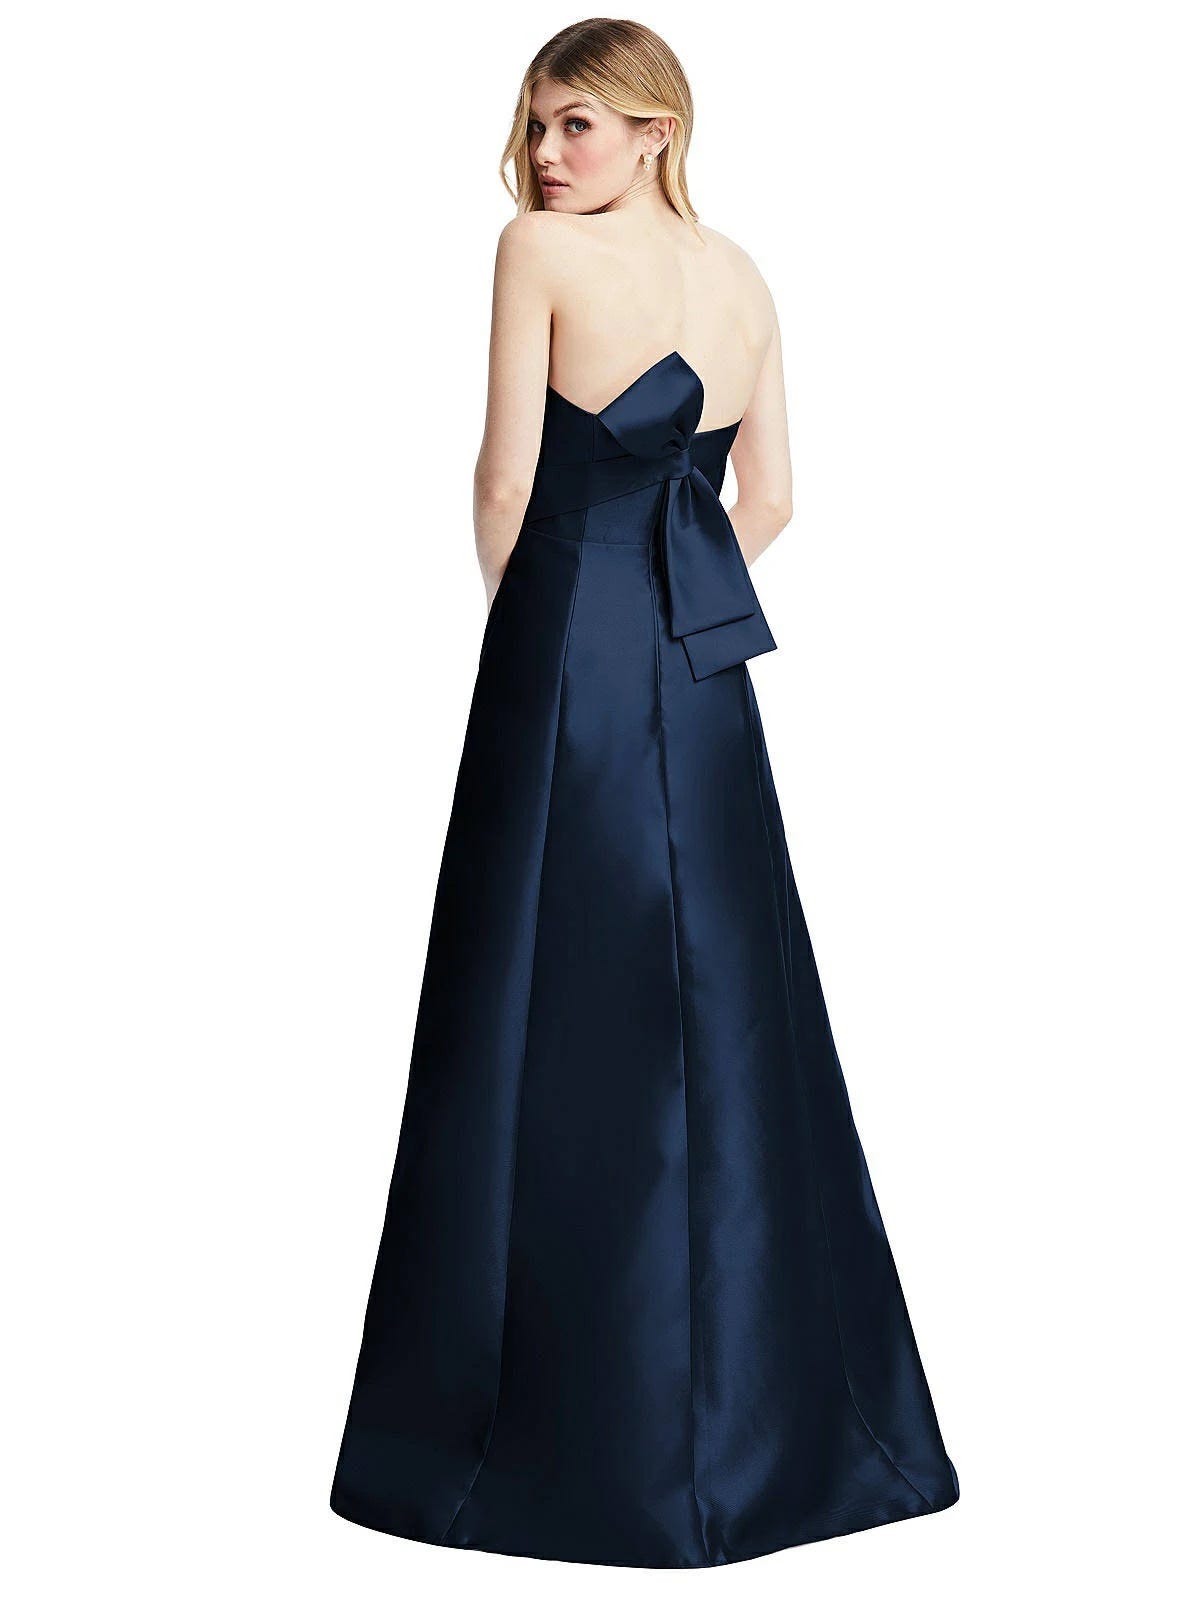 Midnight Navy Strapless A-Line Satin Gown with Modern Bow Detail | Image